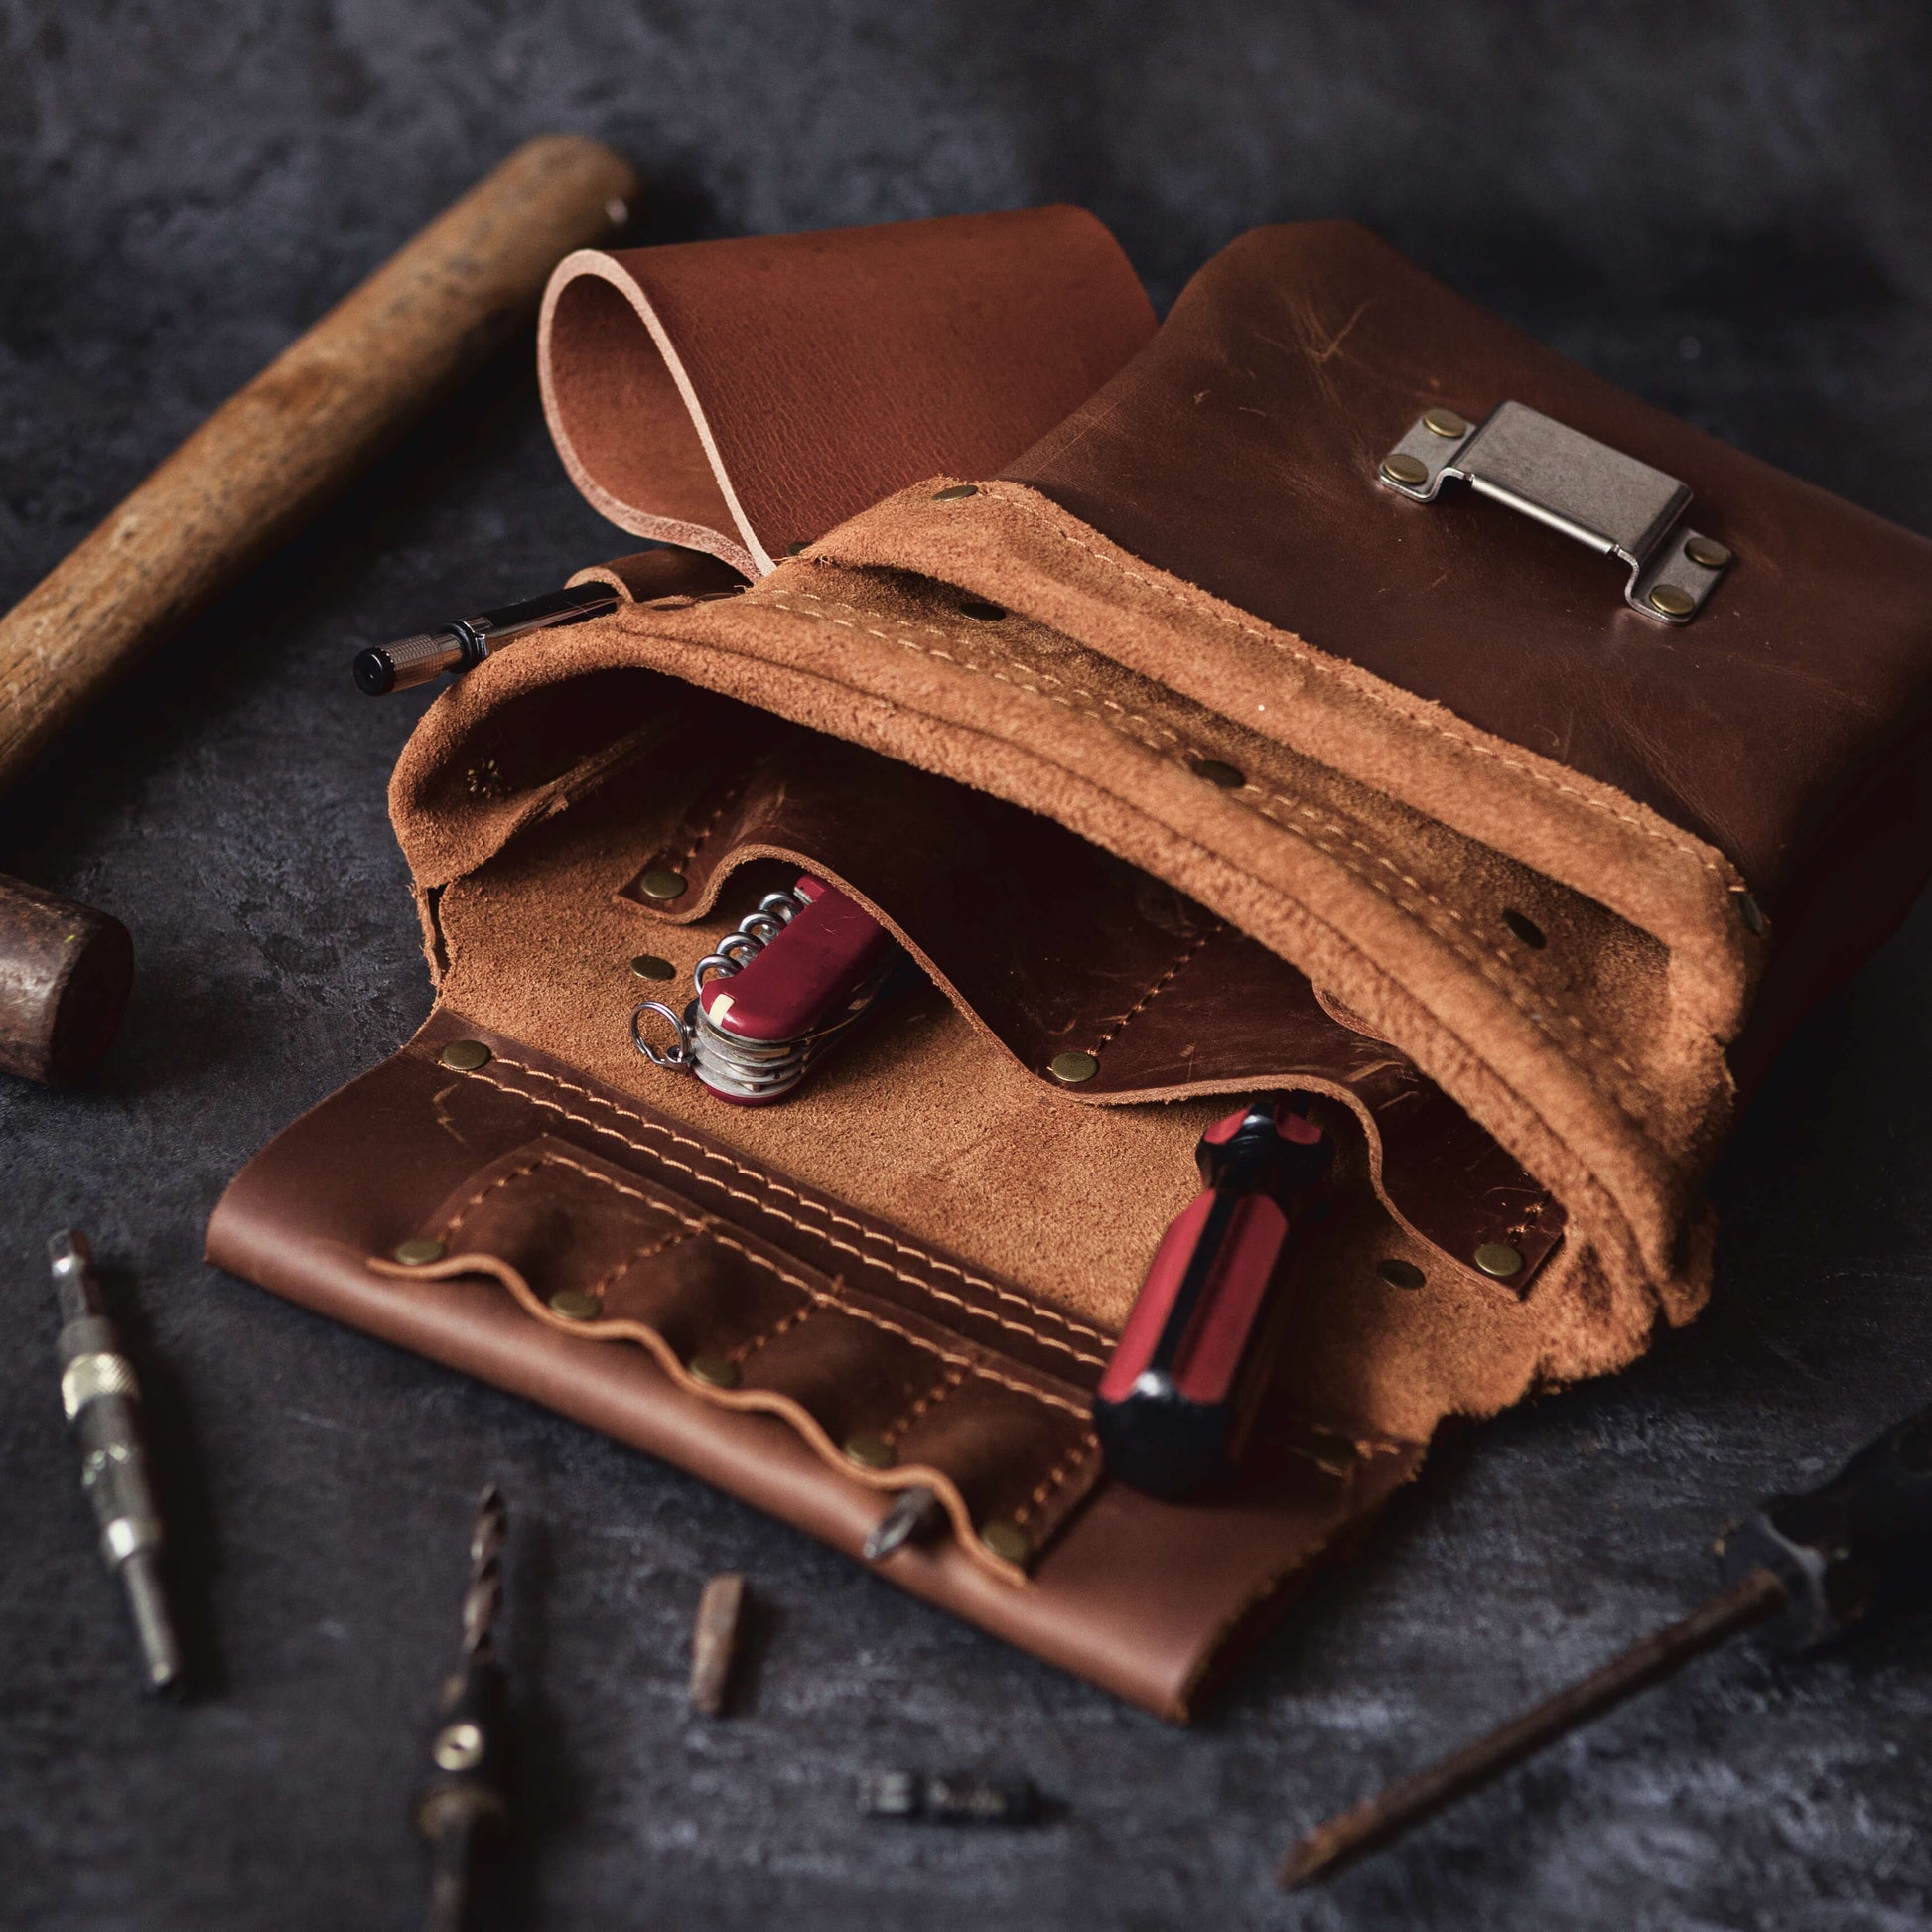 A rustic leather Belt Bag 1 by The Durham Leatherworker, partially open, displays various small tools like screwdrivers inside, with two pocket flashlights also visible. The roll rests on a dark, textured surface alongside additional woodwork tools.